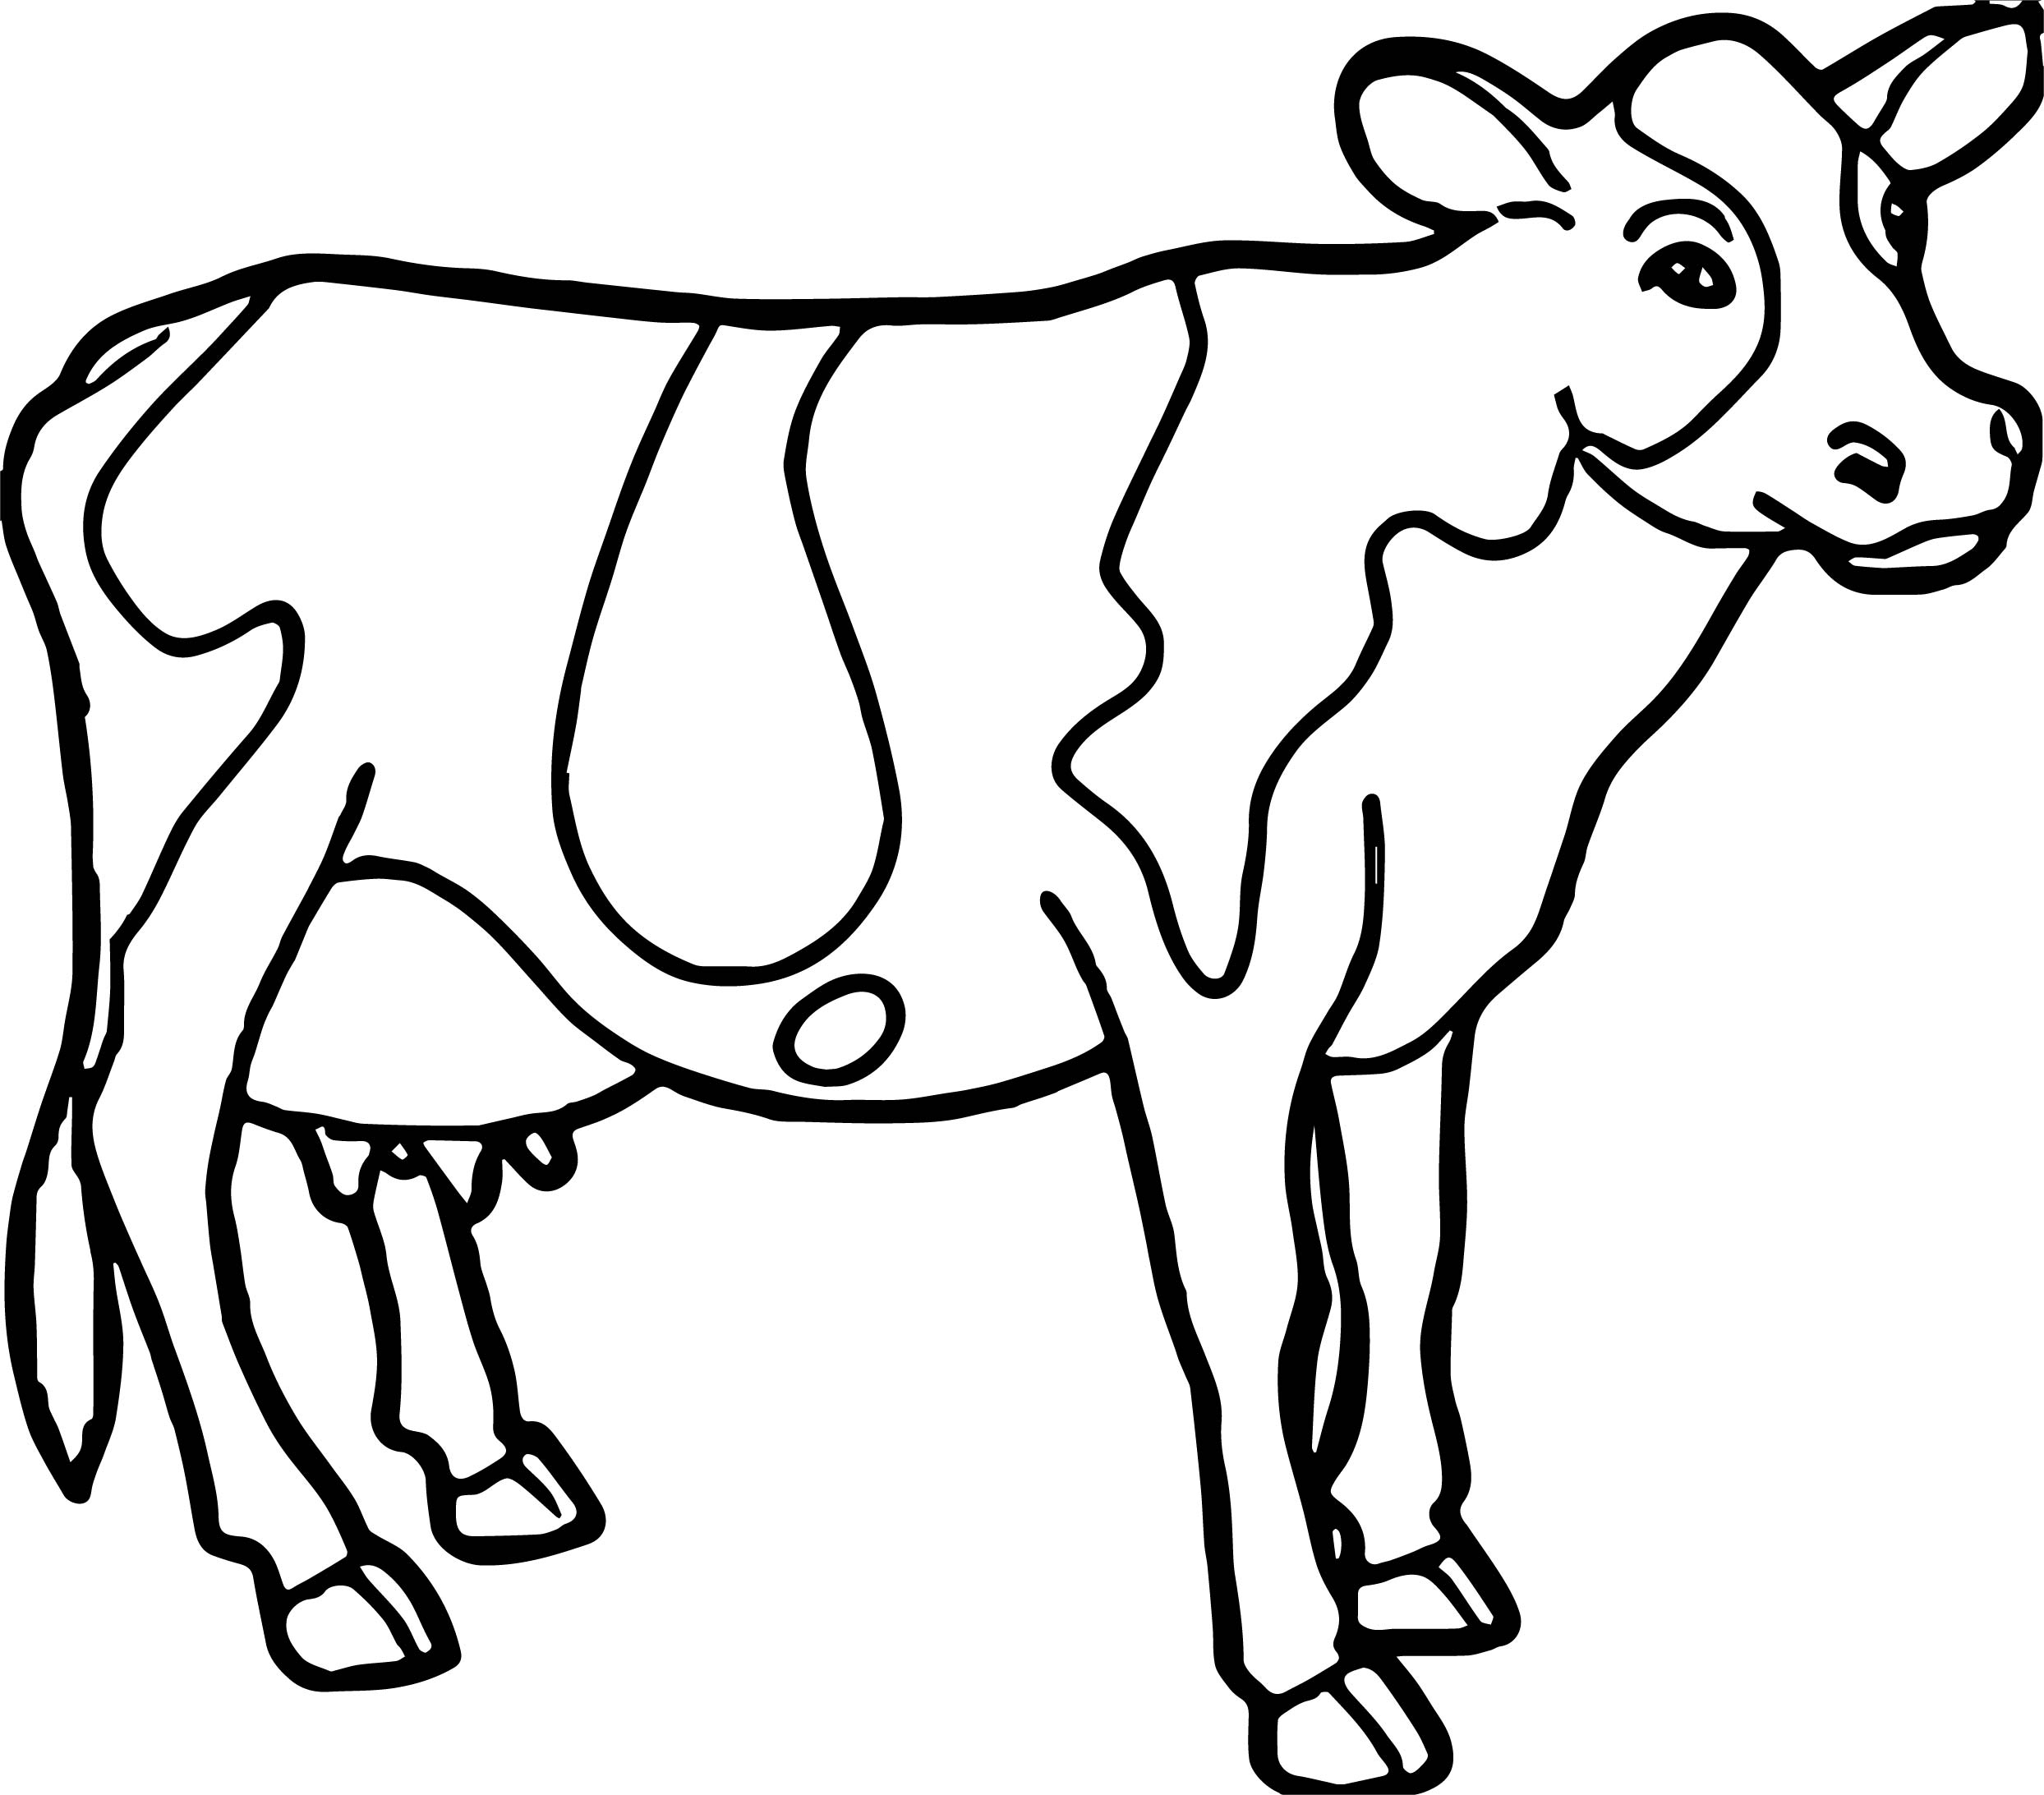 Cow Coloring Pages For Adults At GetColorings Free Printable 